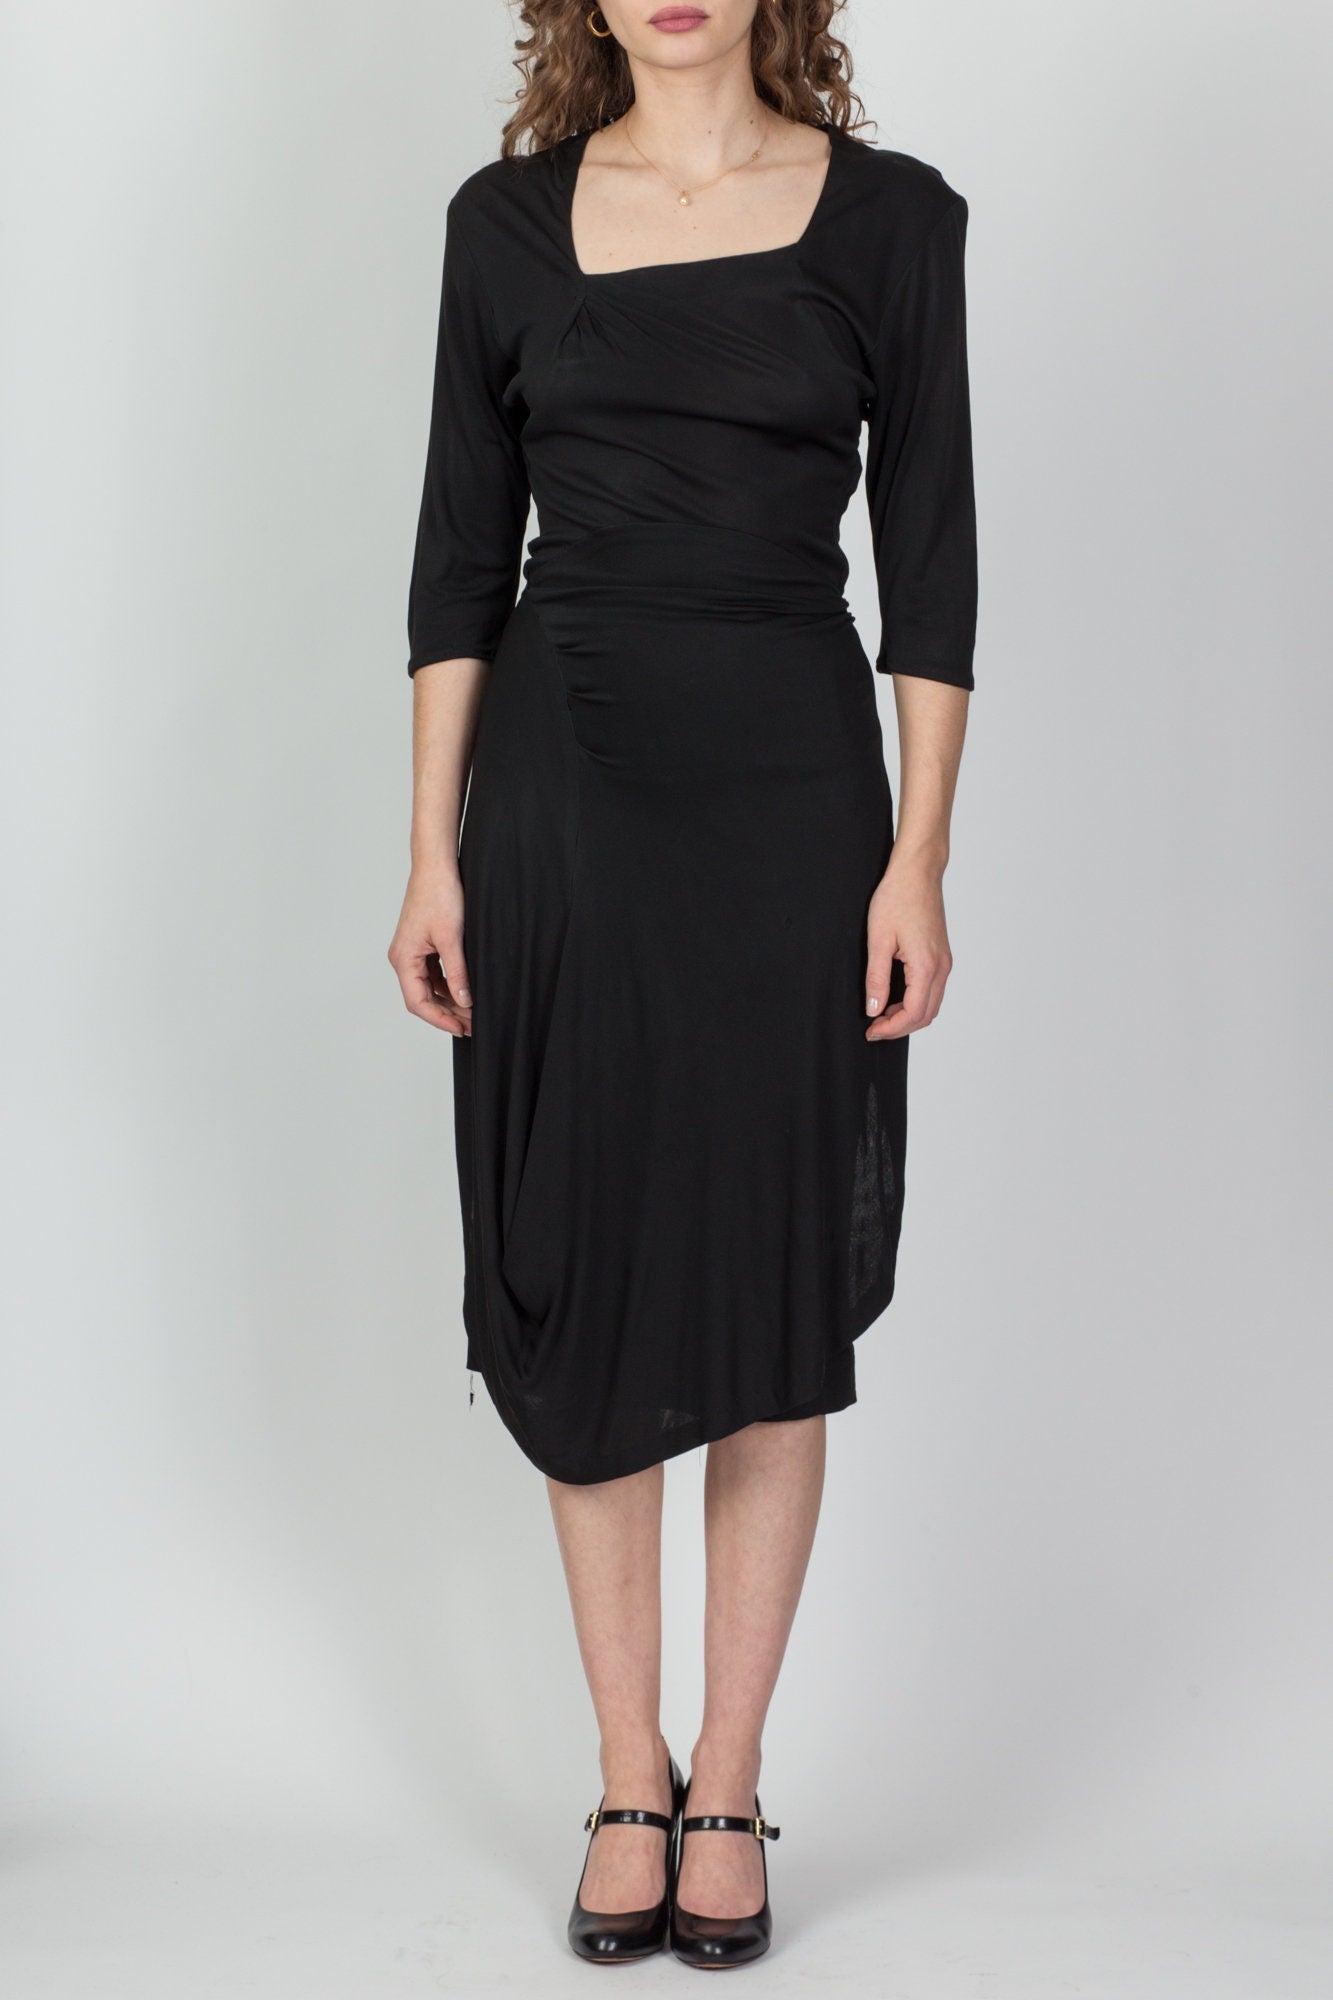 1940s Black Rayon Crepe Dress, As Is - Small 